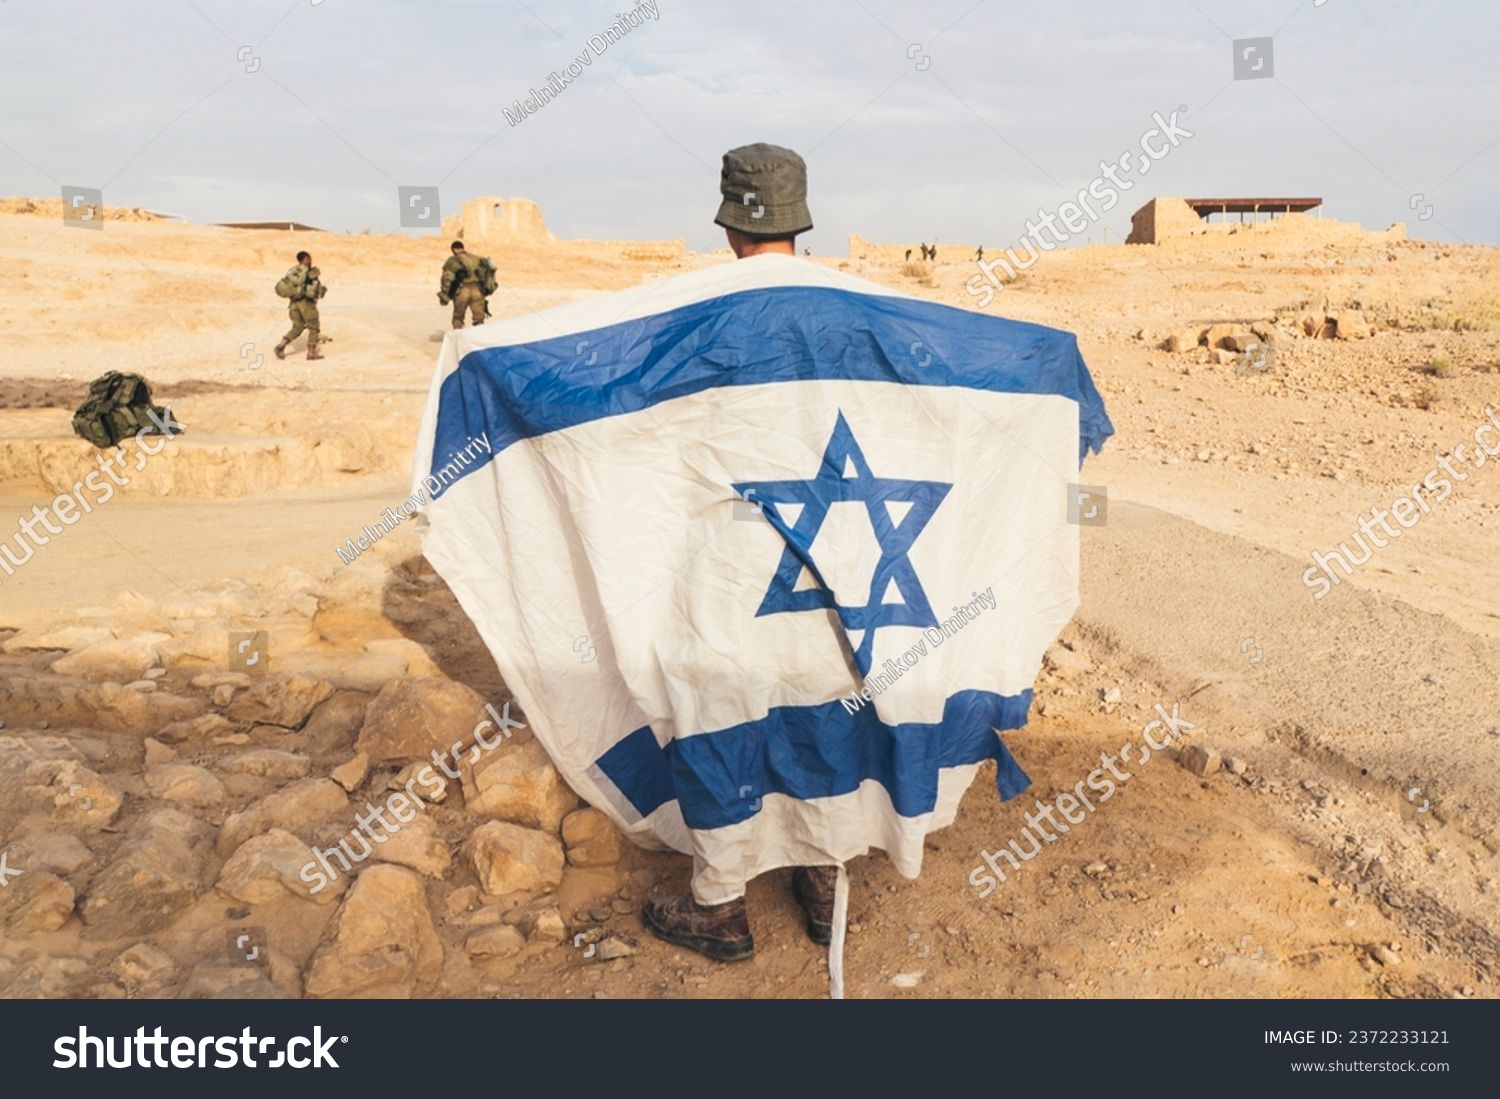 Back view of Israeli soldier with white and blue flag of Israel against the background of the desert and rocks.. Military men protecting promissed land. National flag of Israel. War conflict #2372233121